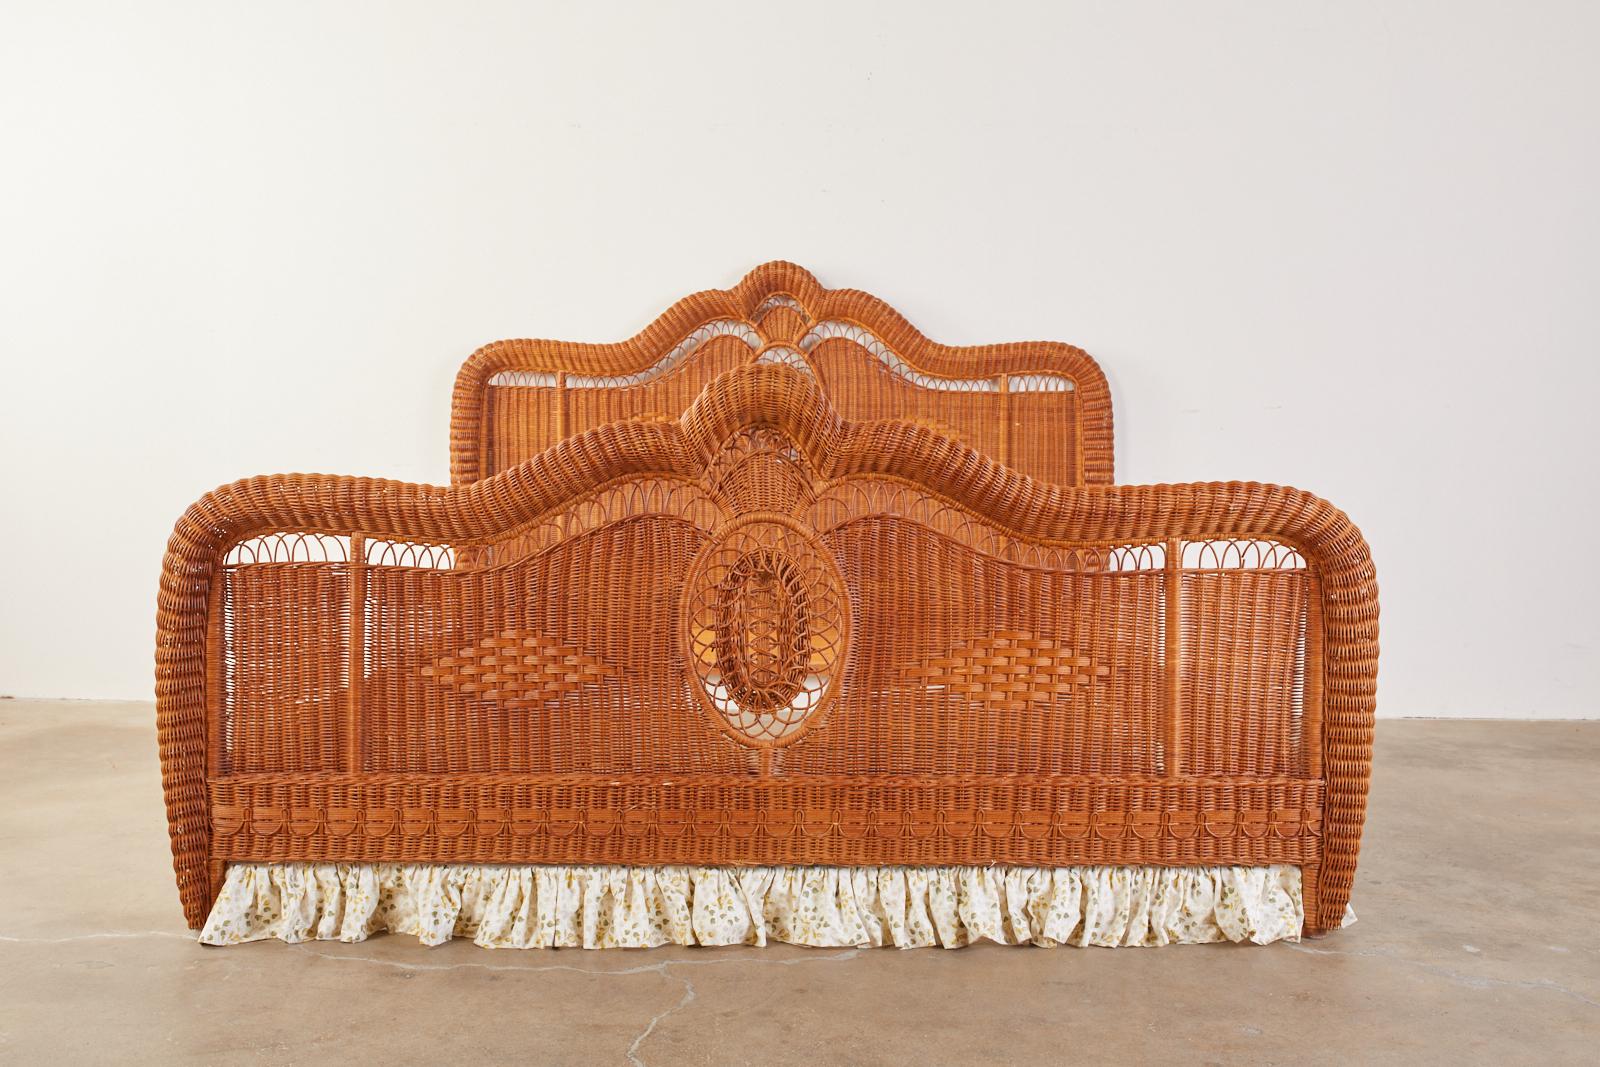 Fantastic 20th century Bohemian wicker bed made in the style of the later reproduction beds by Ralph Lauren. Features gracefully curved headboard and footboard centered with open fretwork oval designs. The rails and footboard have decorative dust